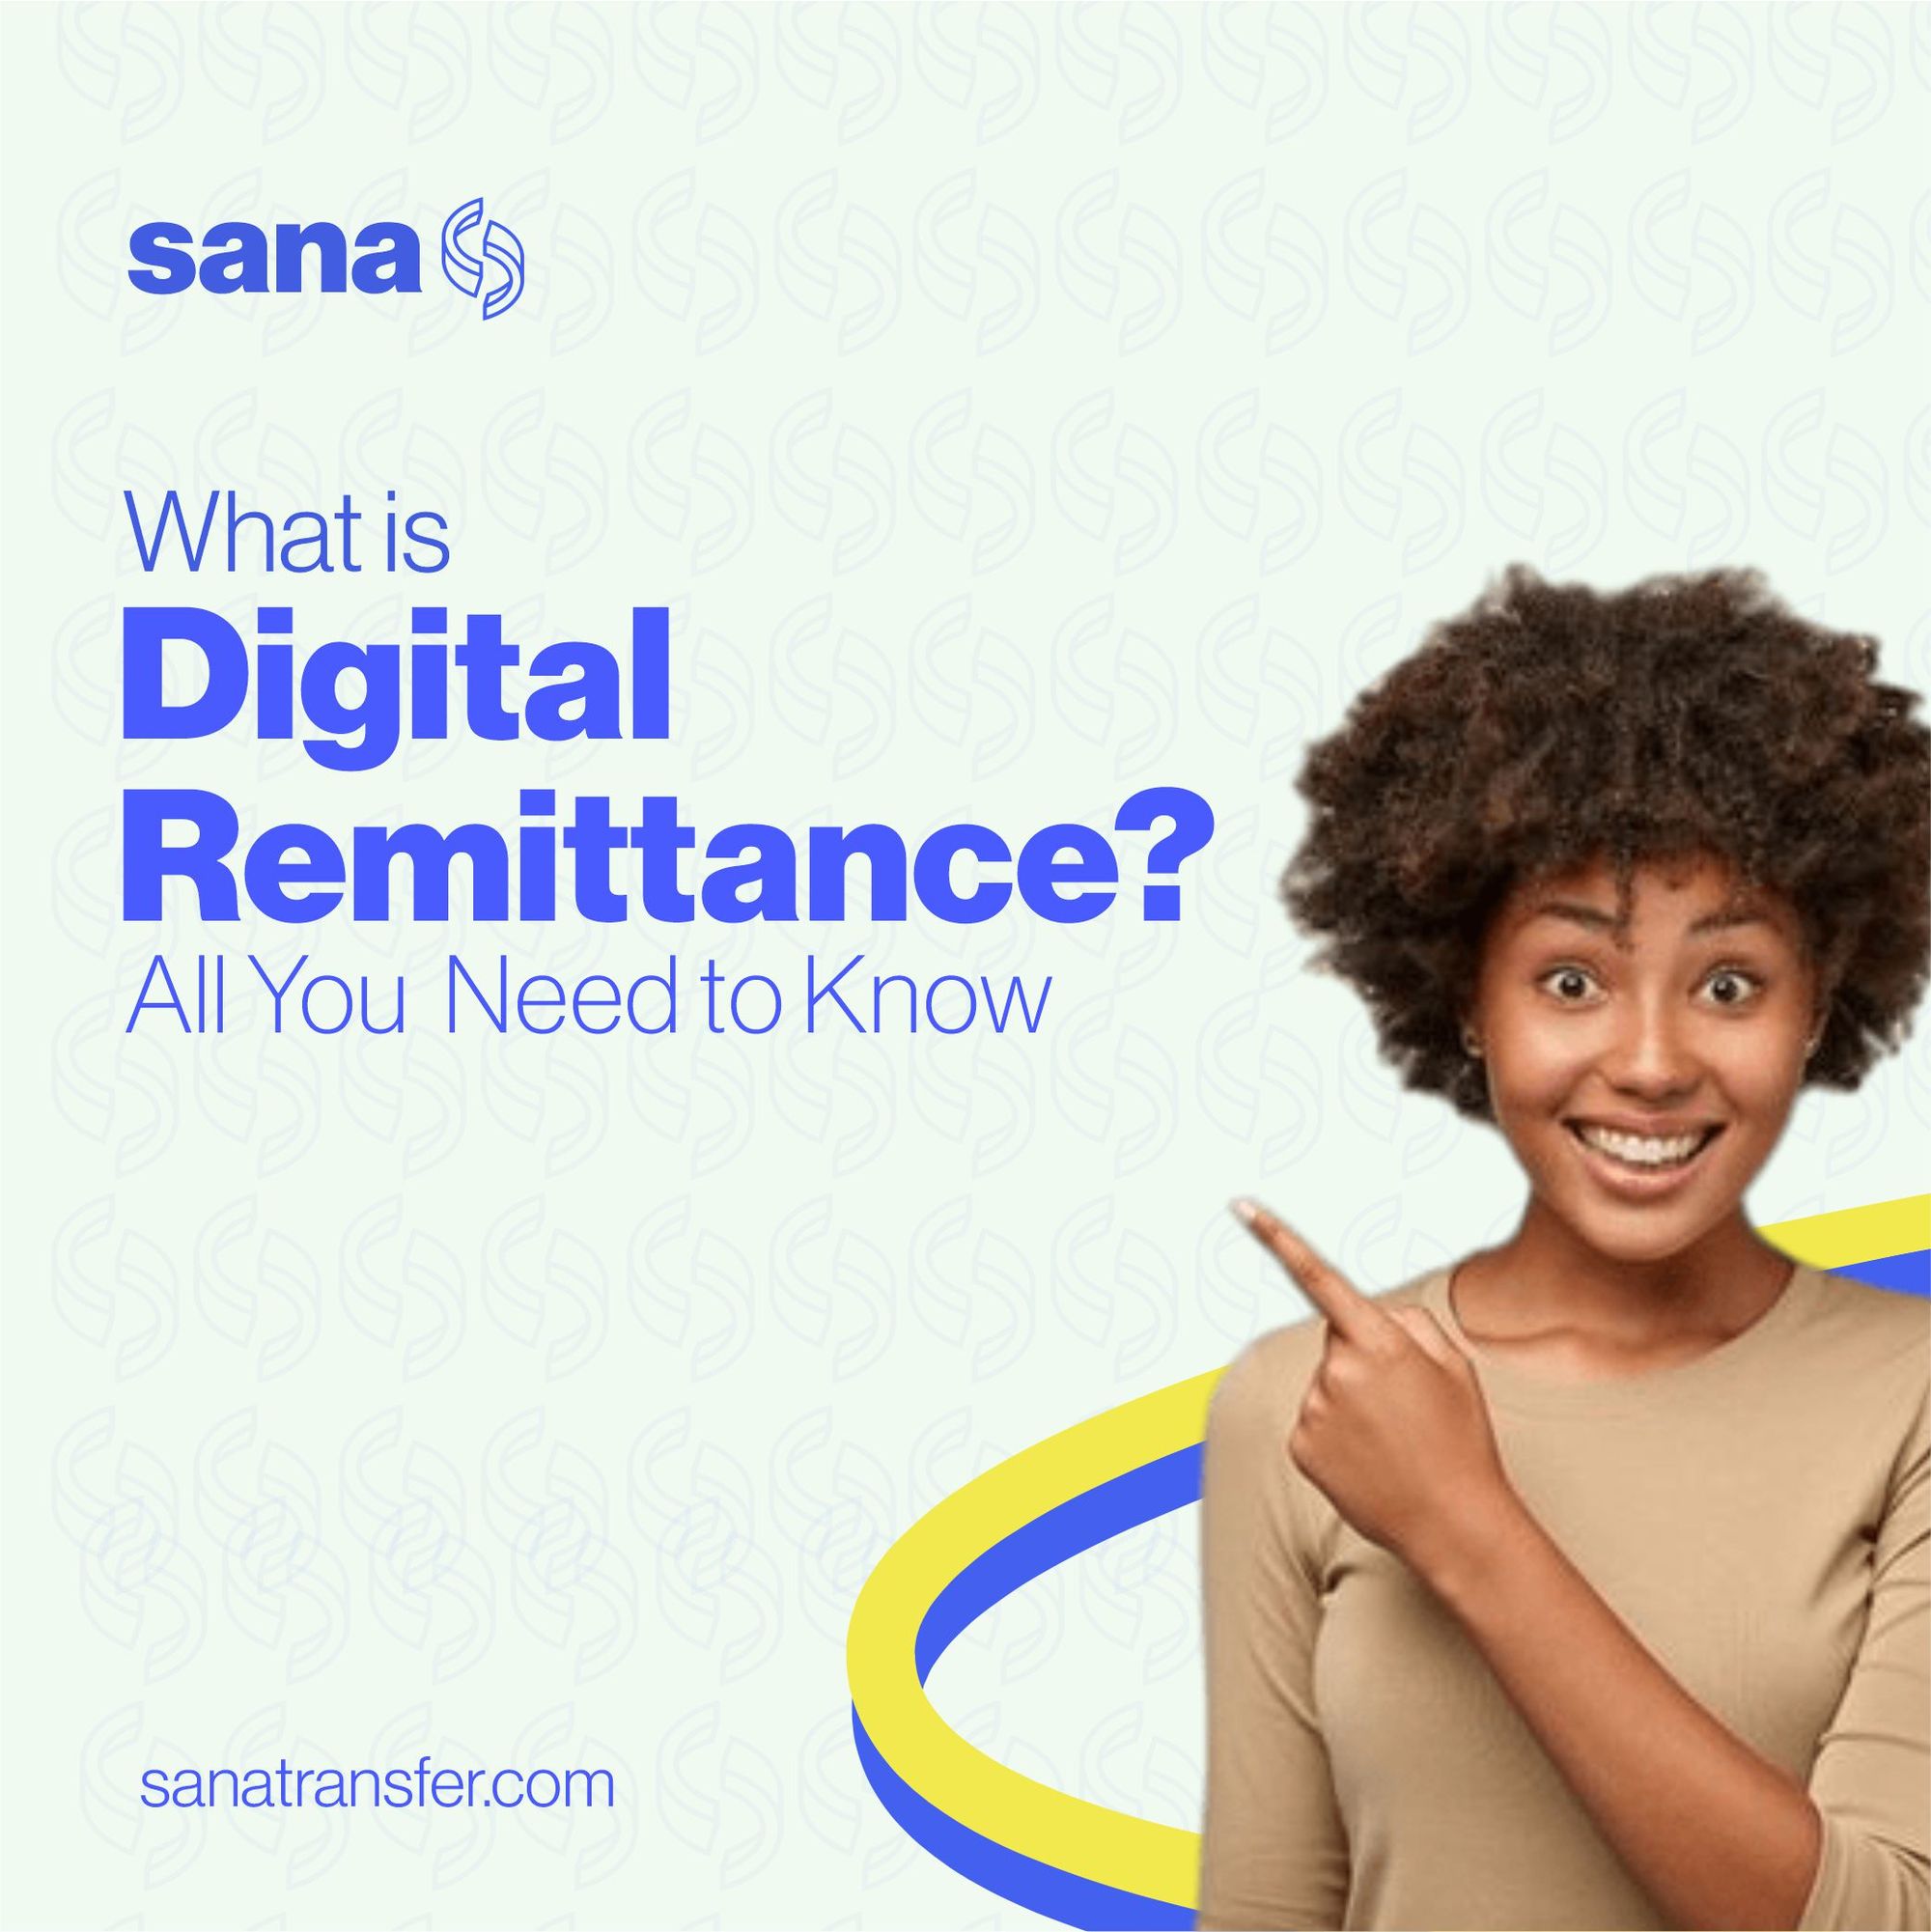 What is Digital Remittance?